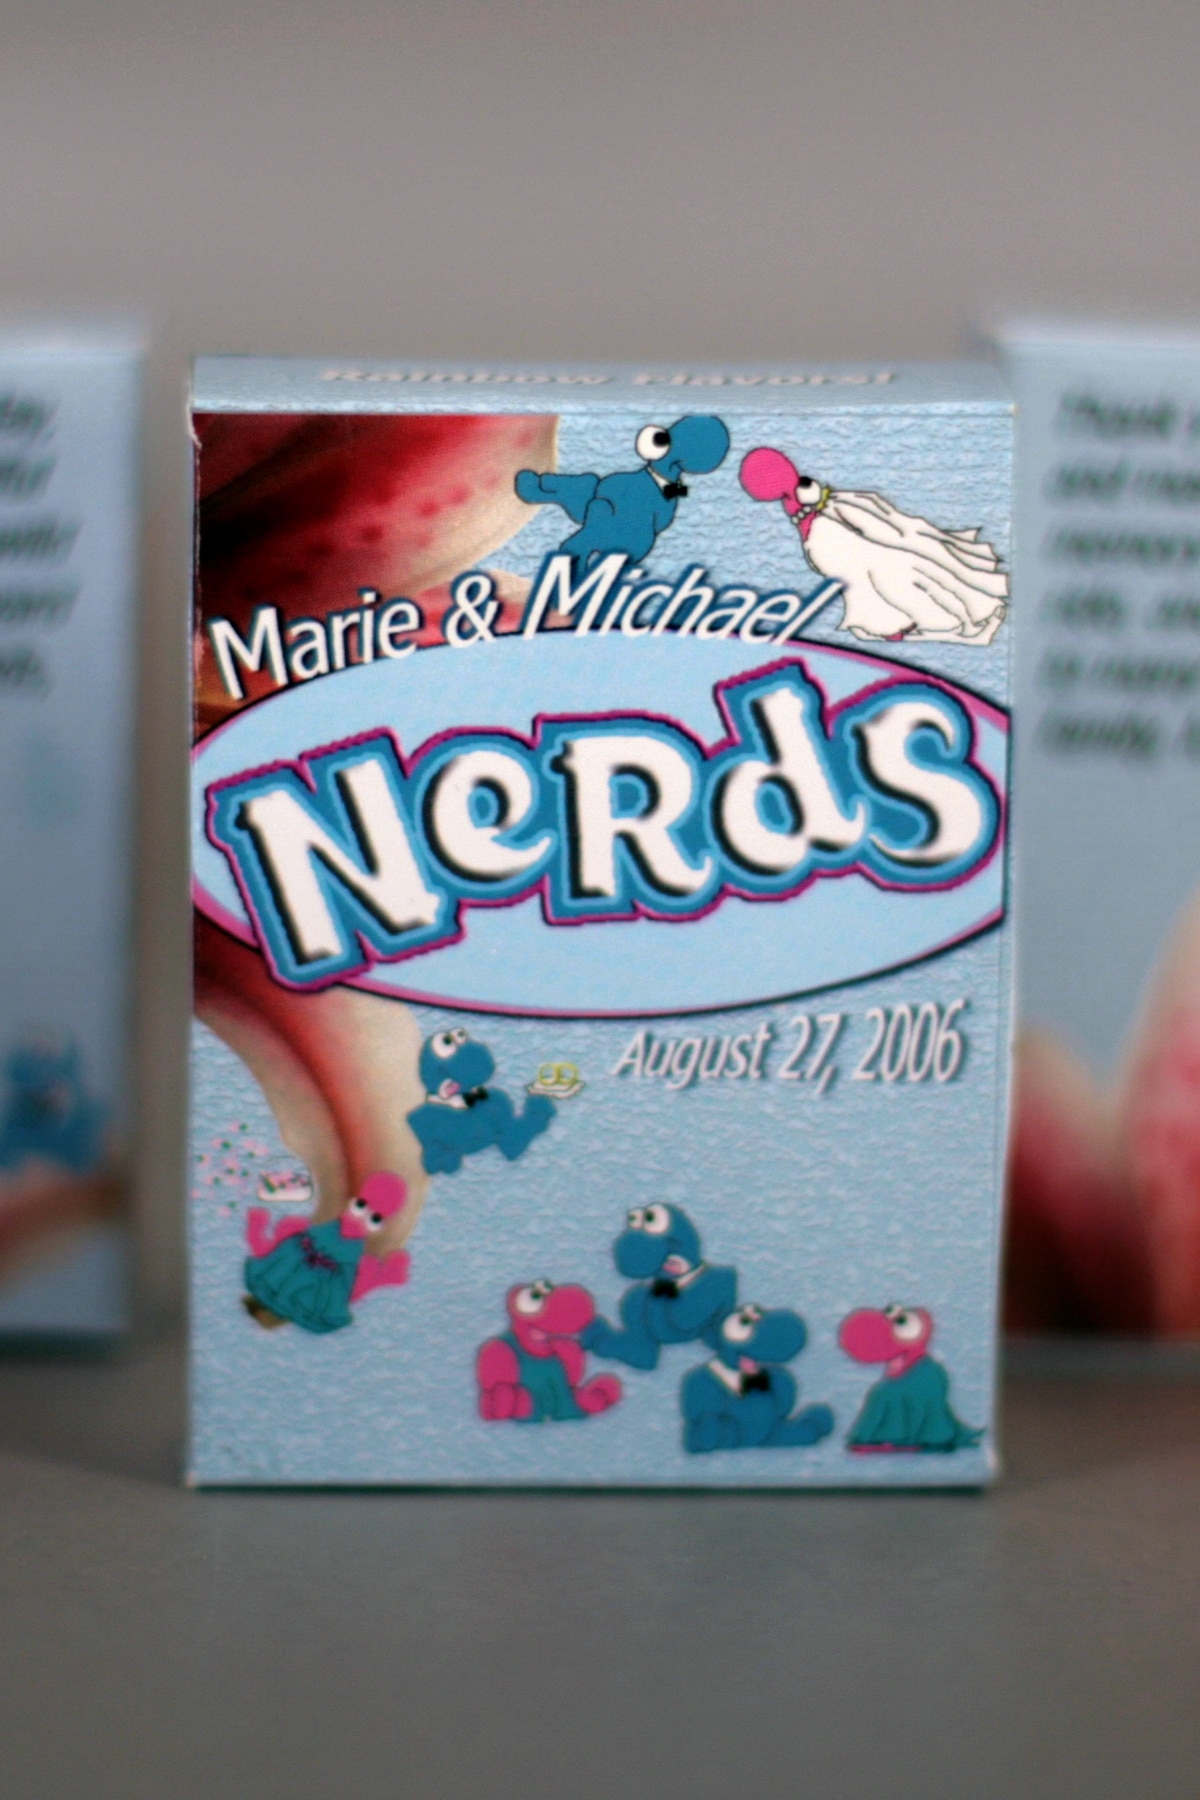 Several customized Nerds Candy Wedding Favor boxes.  They're light blue, with blue and pink Nerds characters, a bride and groom, and stargazer lilies.